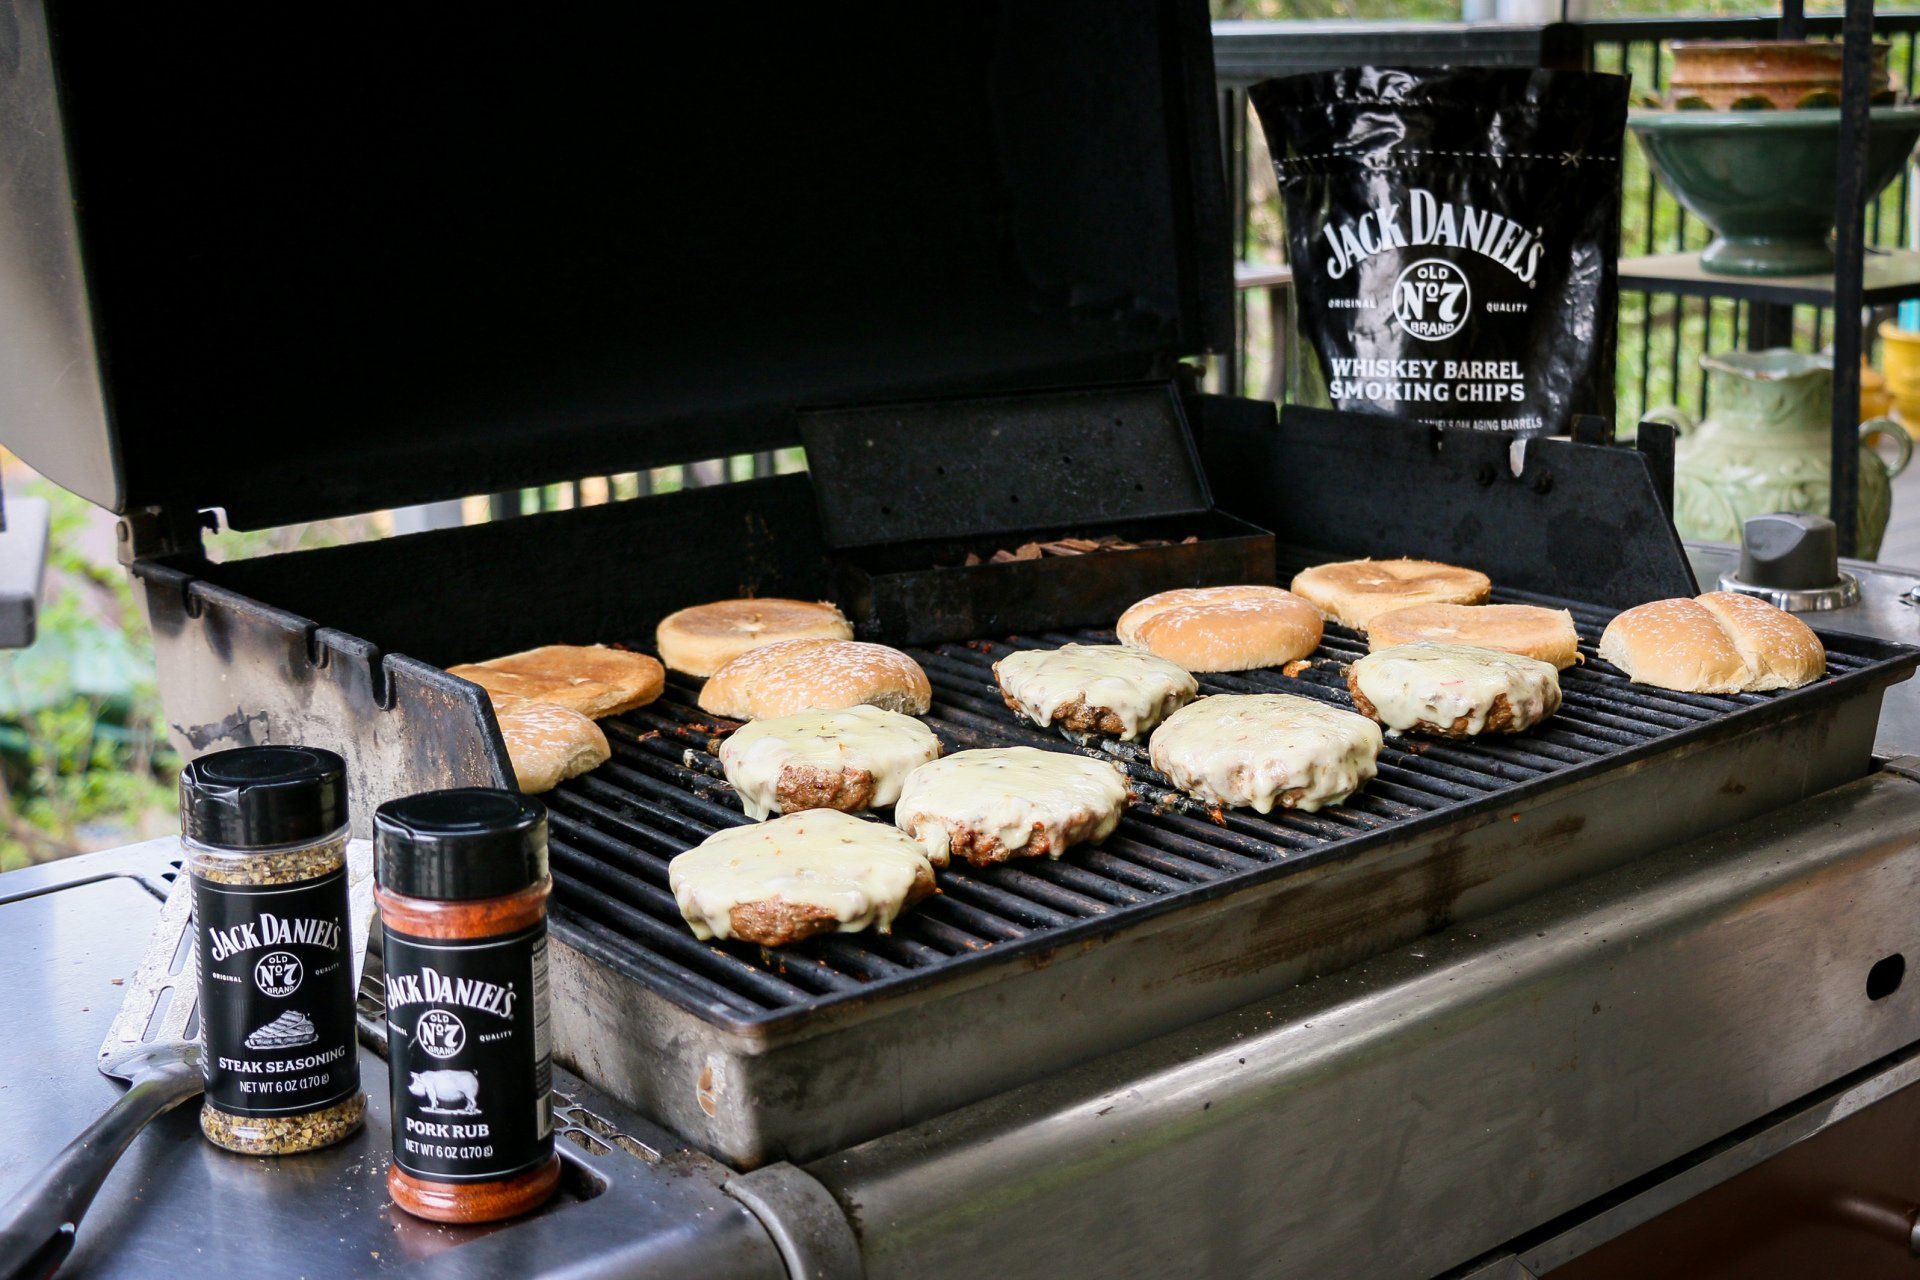 Pork Burgers with melted cheese & buns on grill with Jack Daniels Steak Seasoning, Pork Rub and Whiskey Barrel Smoking Chips bag